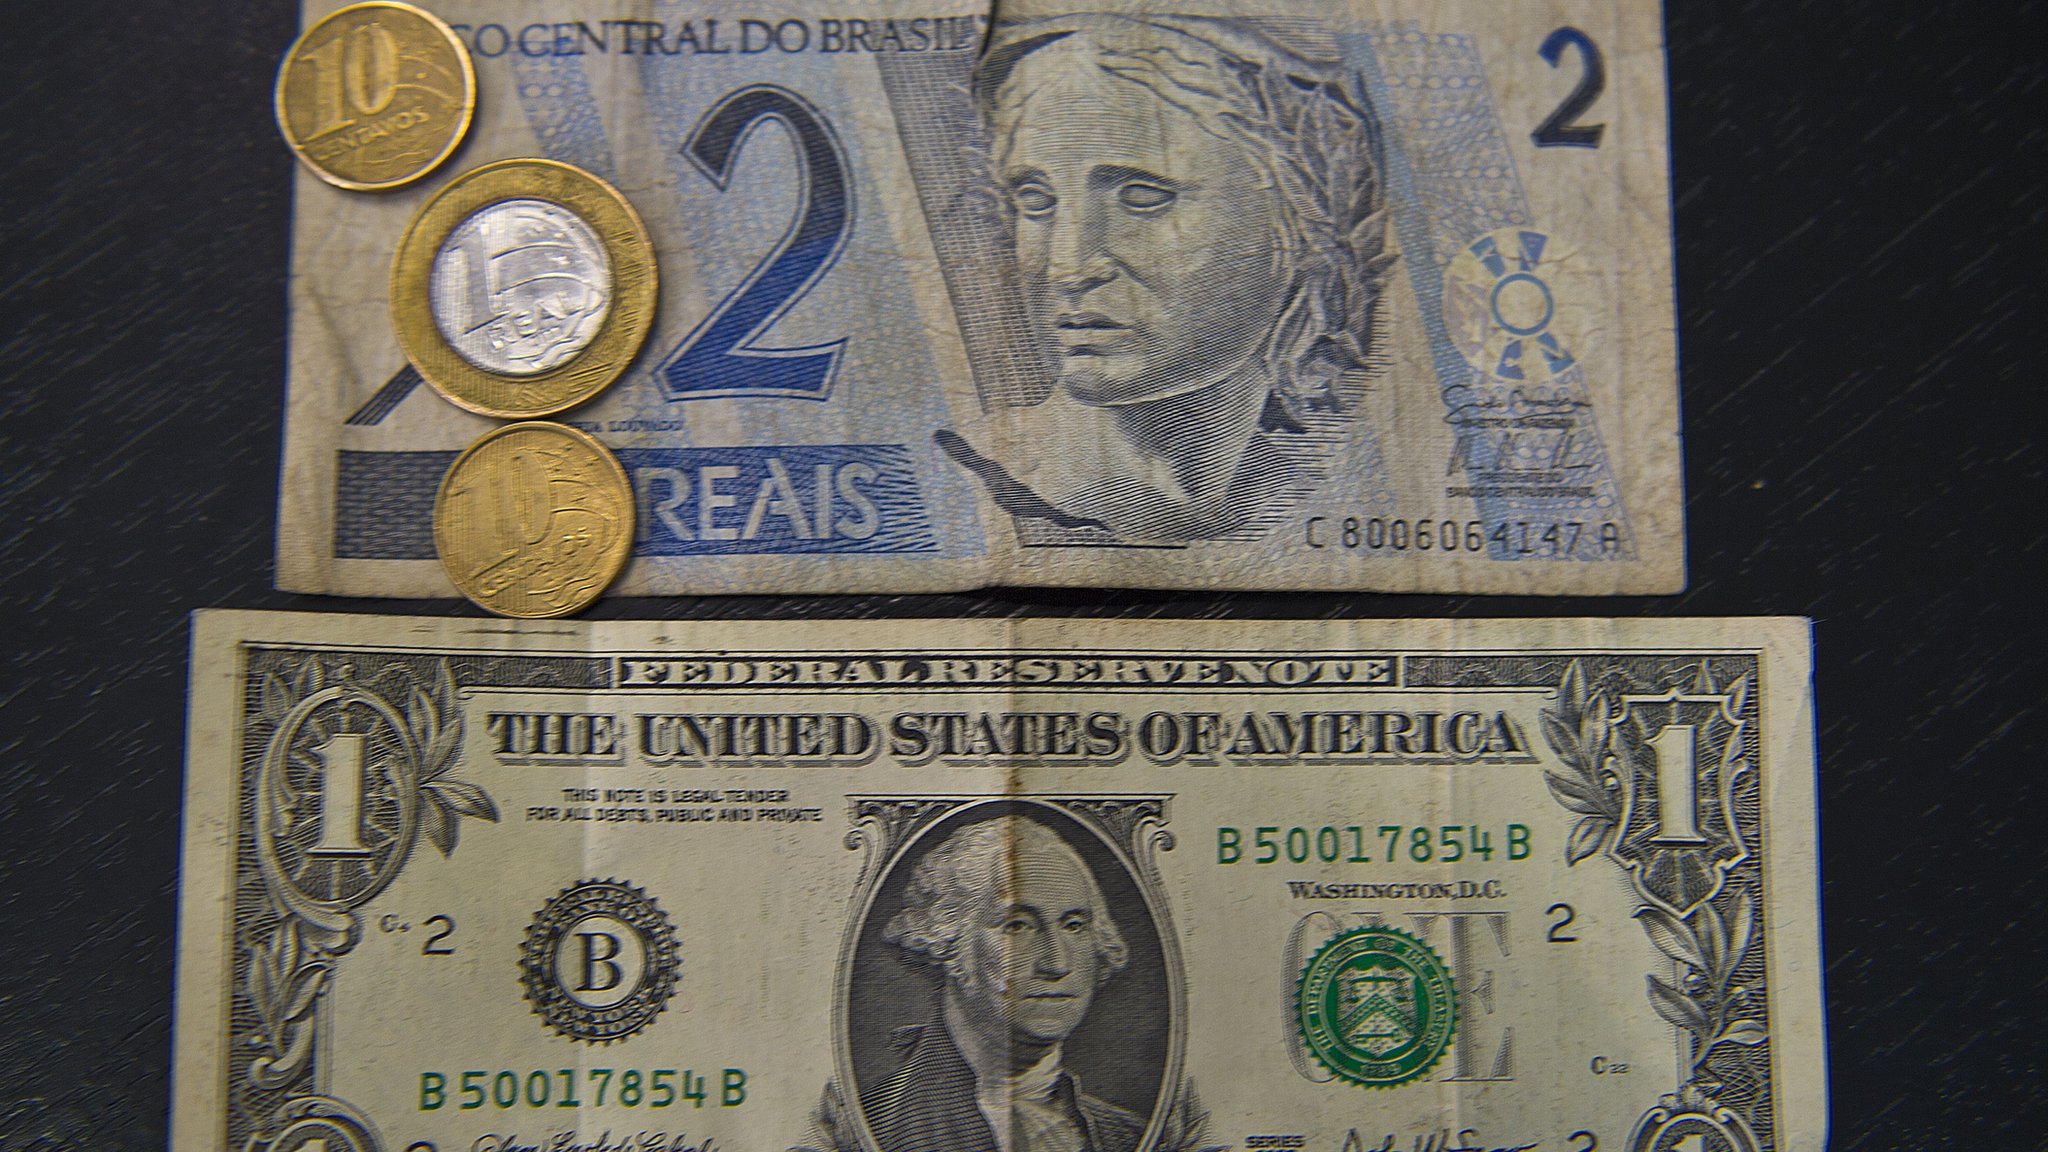 Convert Brazilian Real to United States Dollar